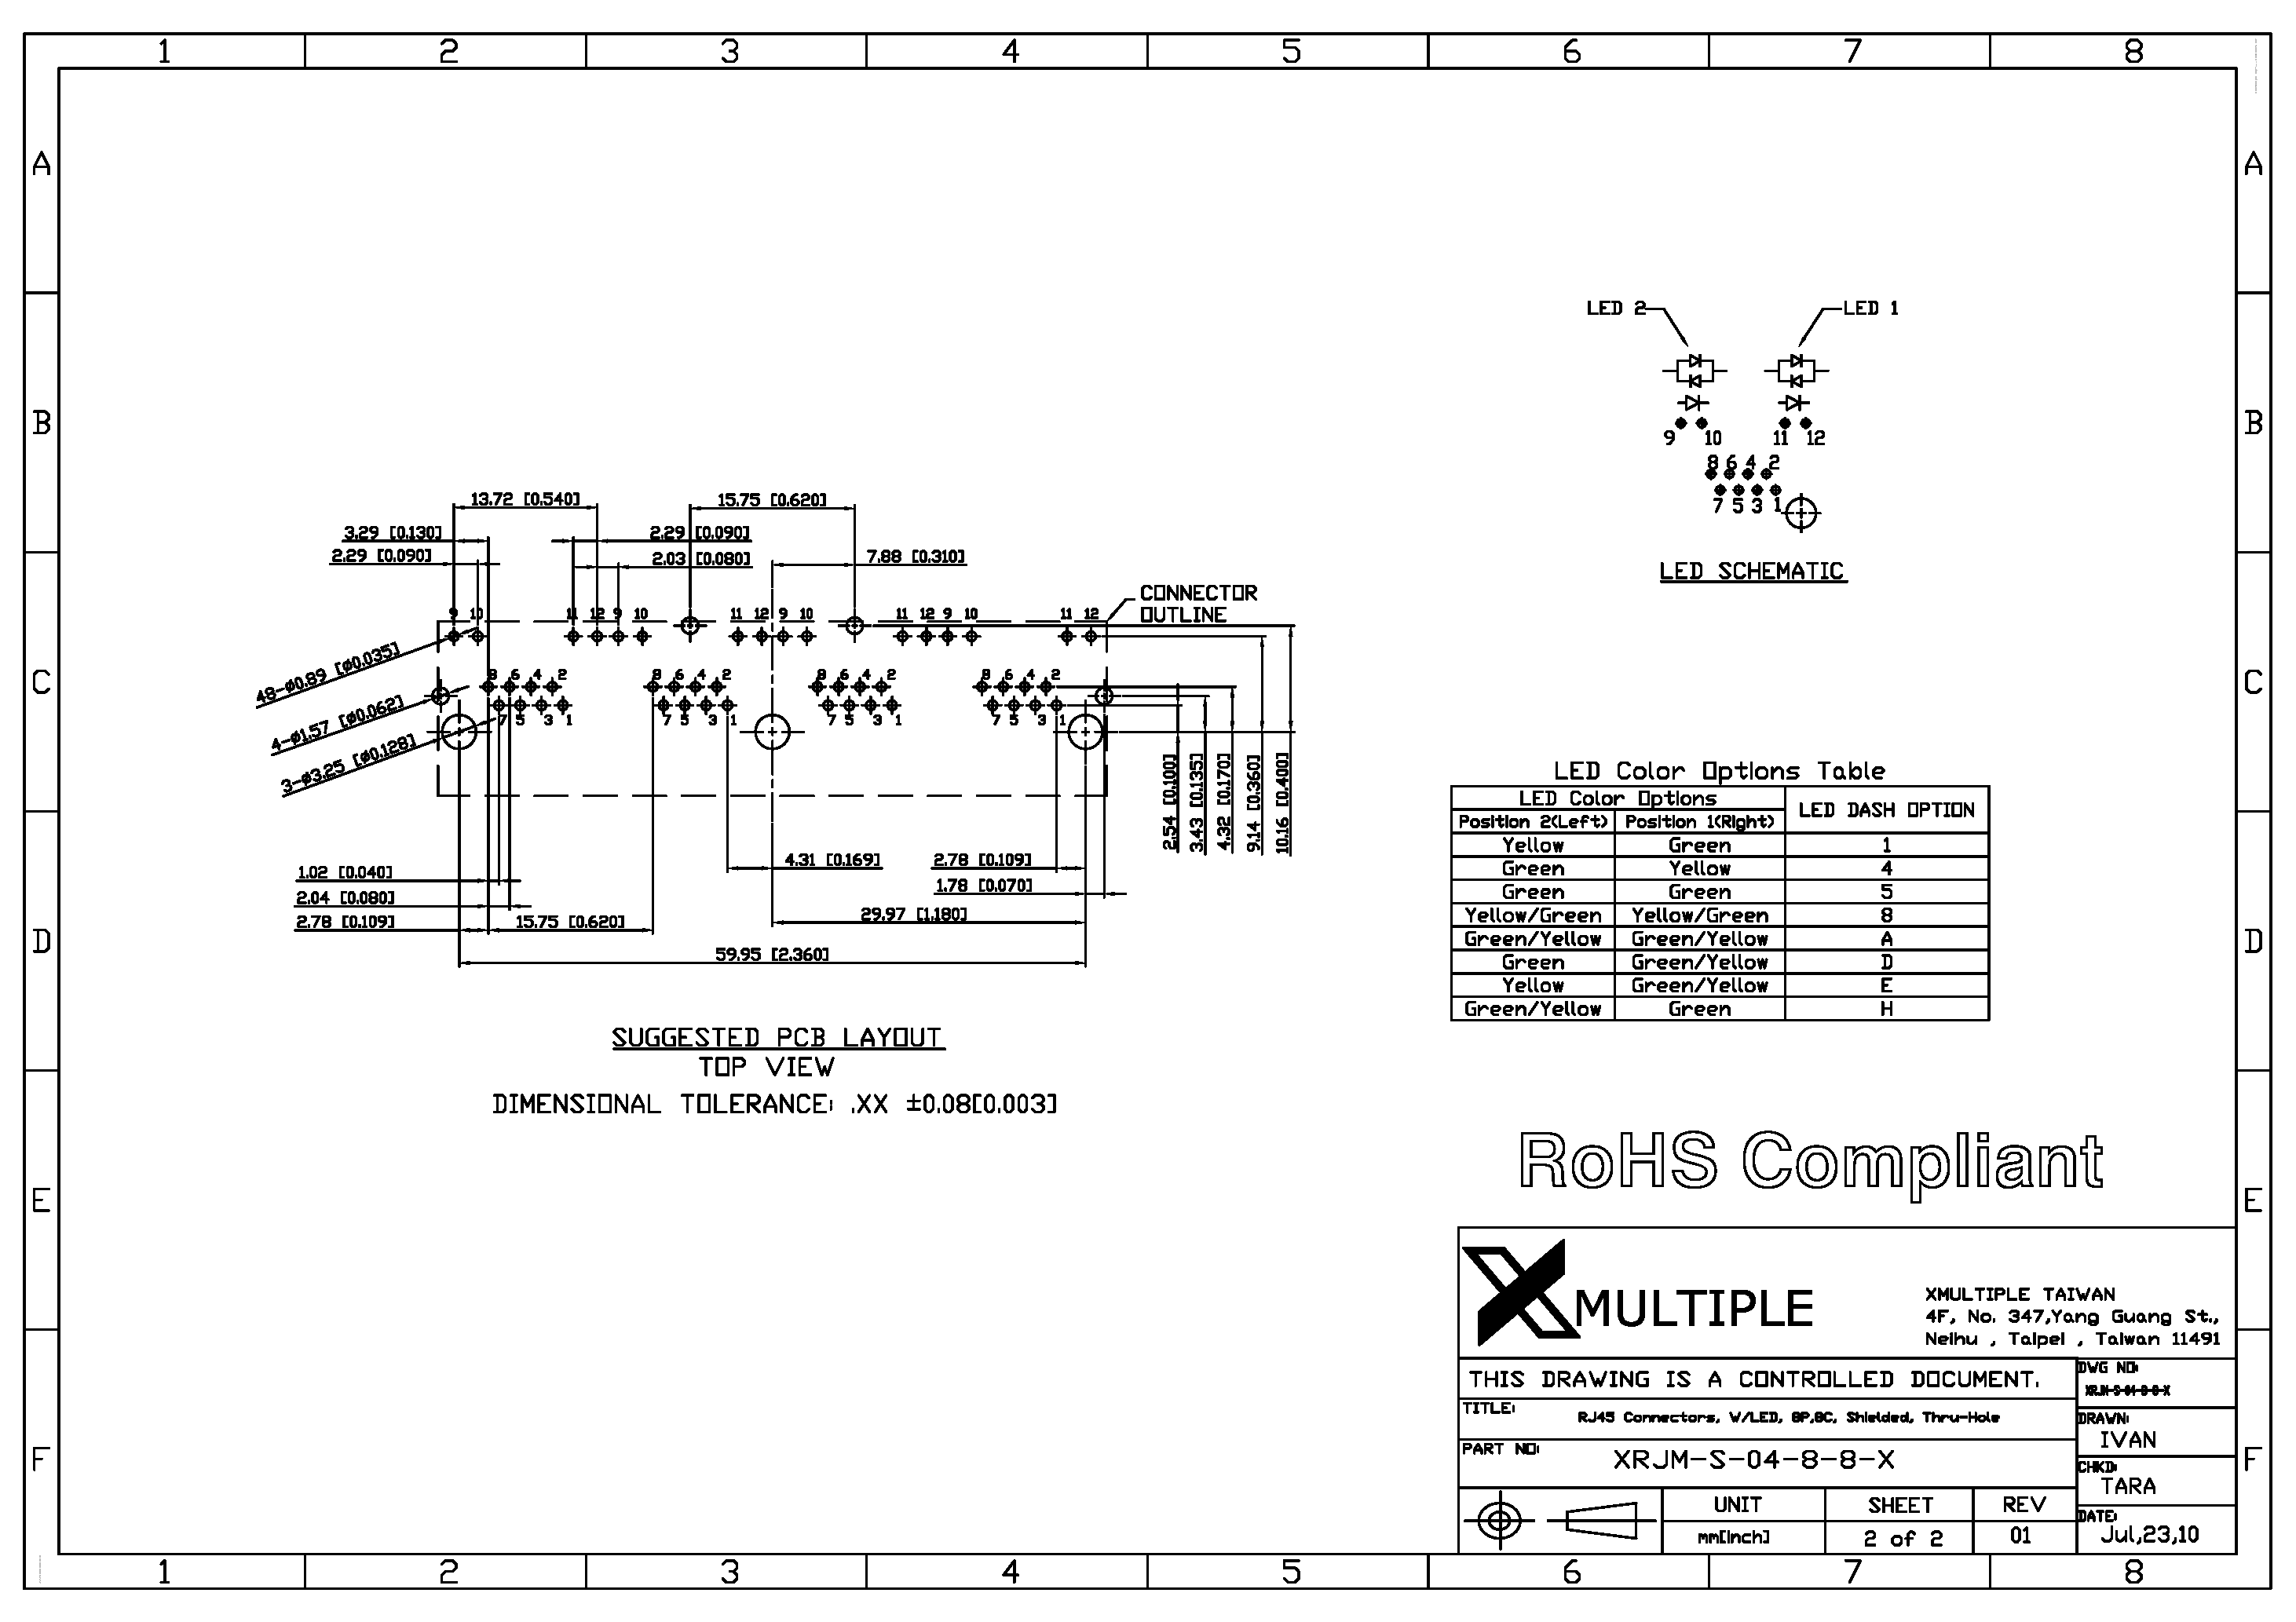 Datasheet XRJM-S-04-8-8-x - Connector page 2